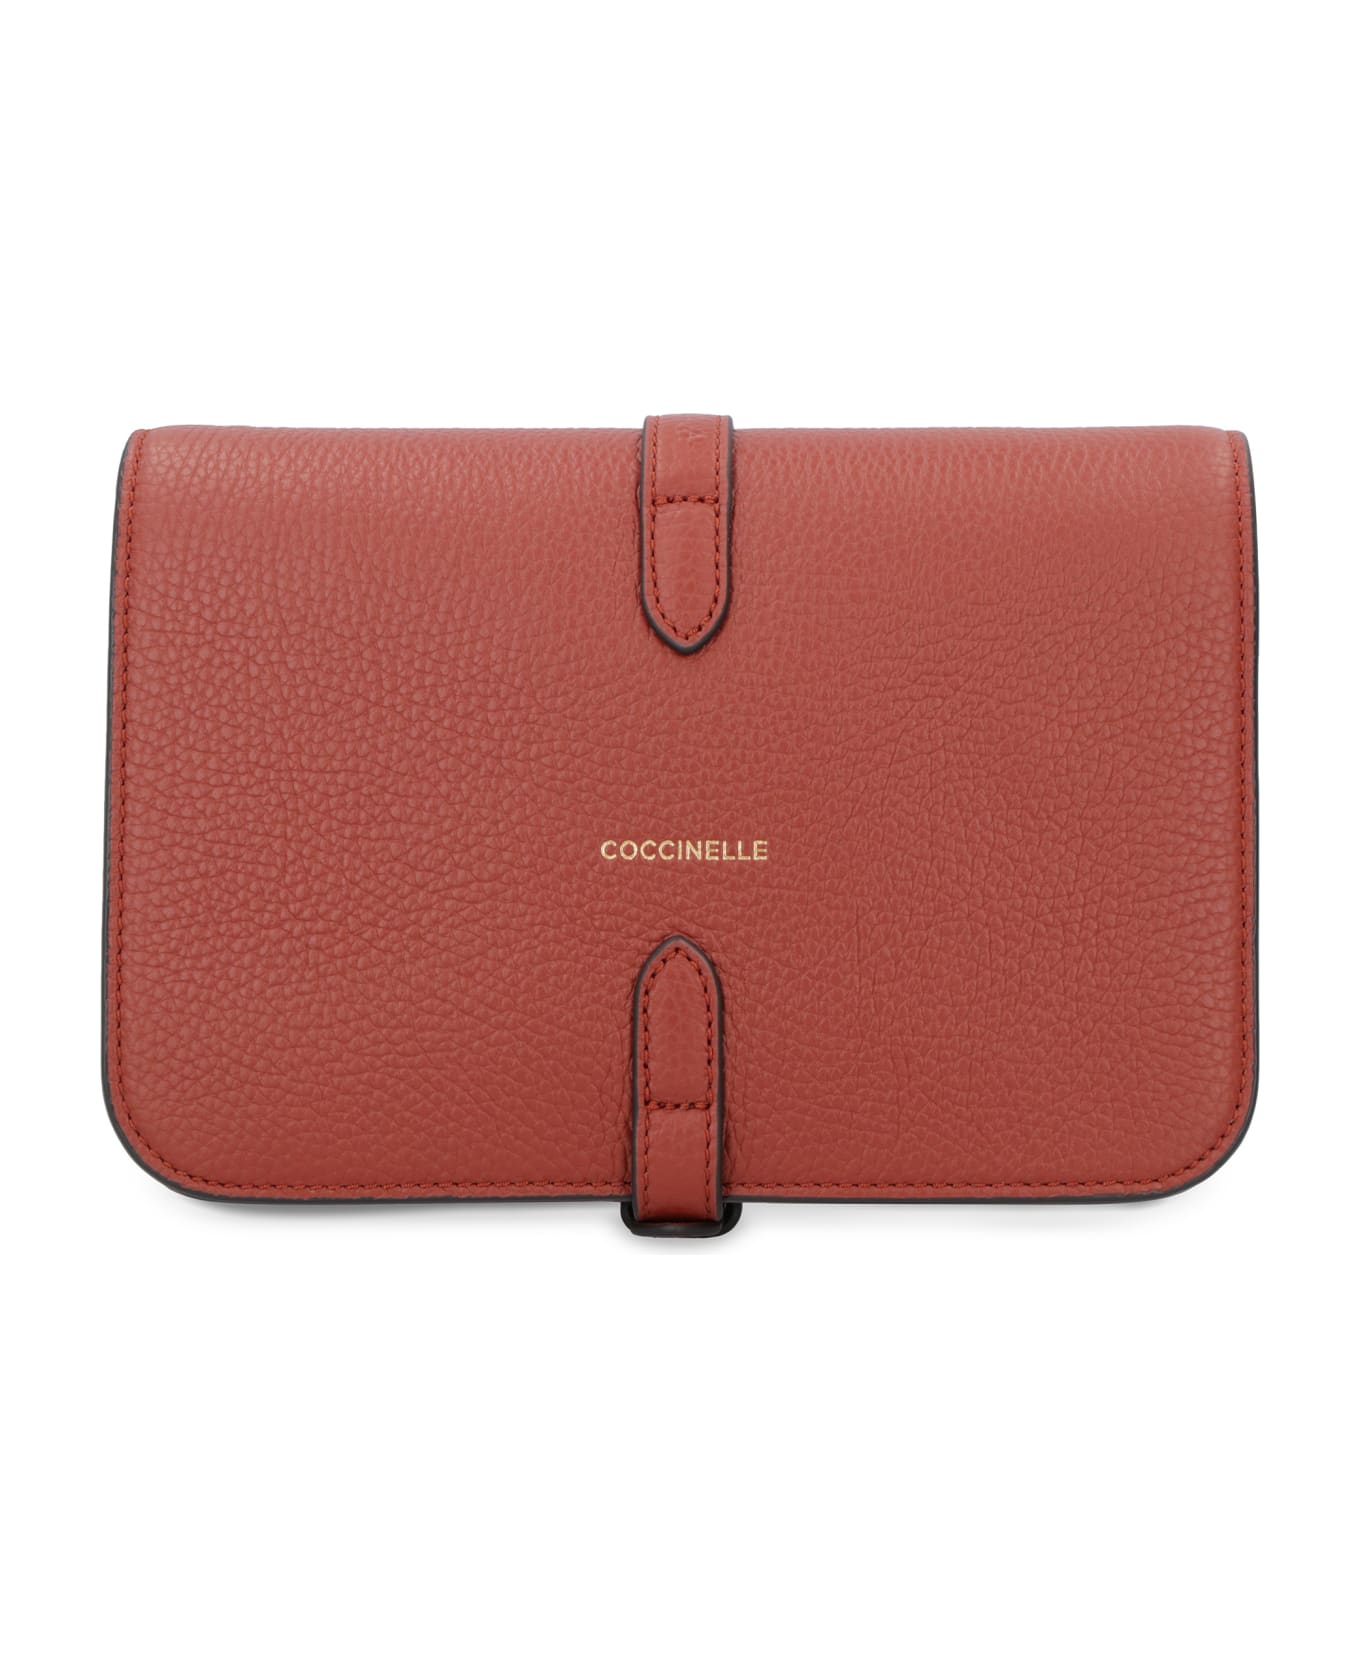 Coccinelle Cosima Leather Crossbody Bag - red ショルダーバッグ